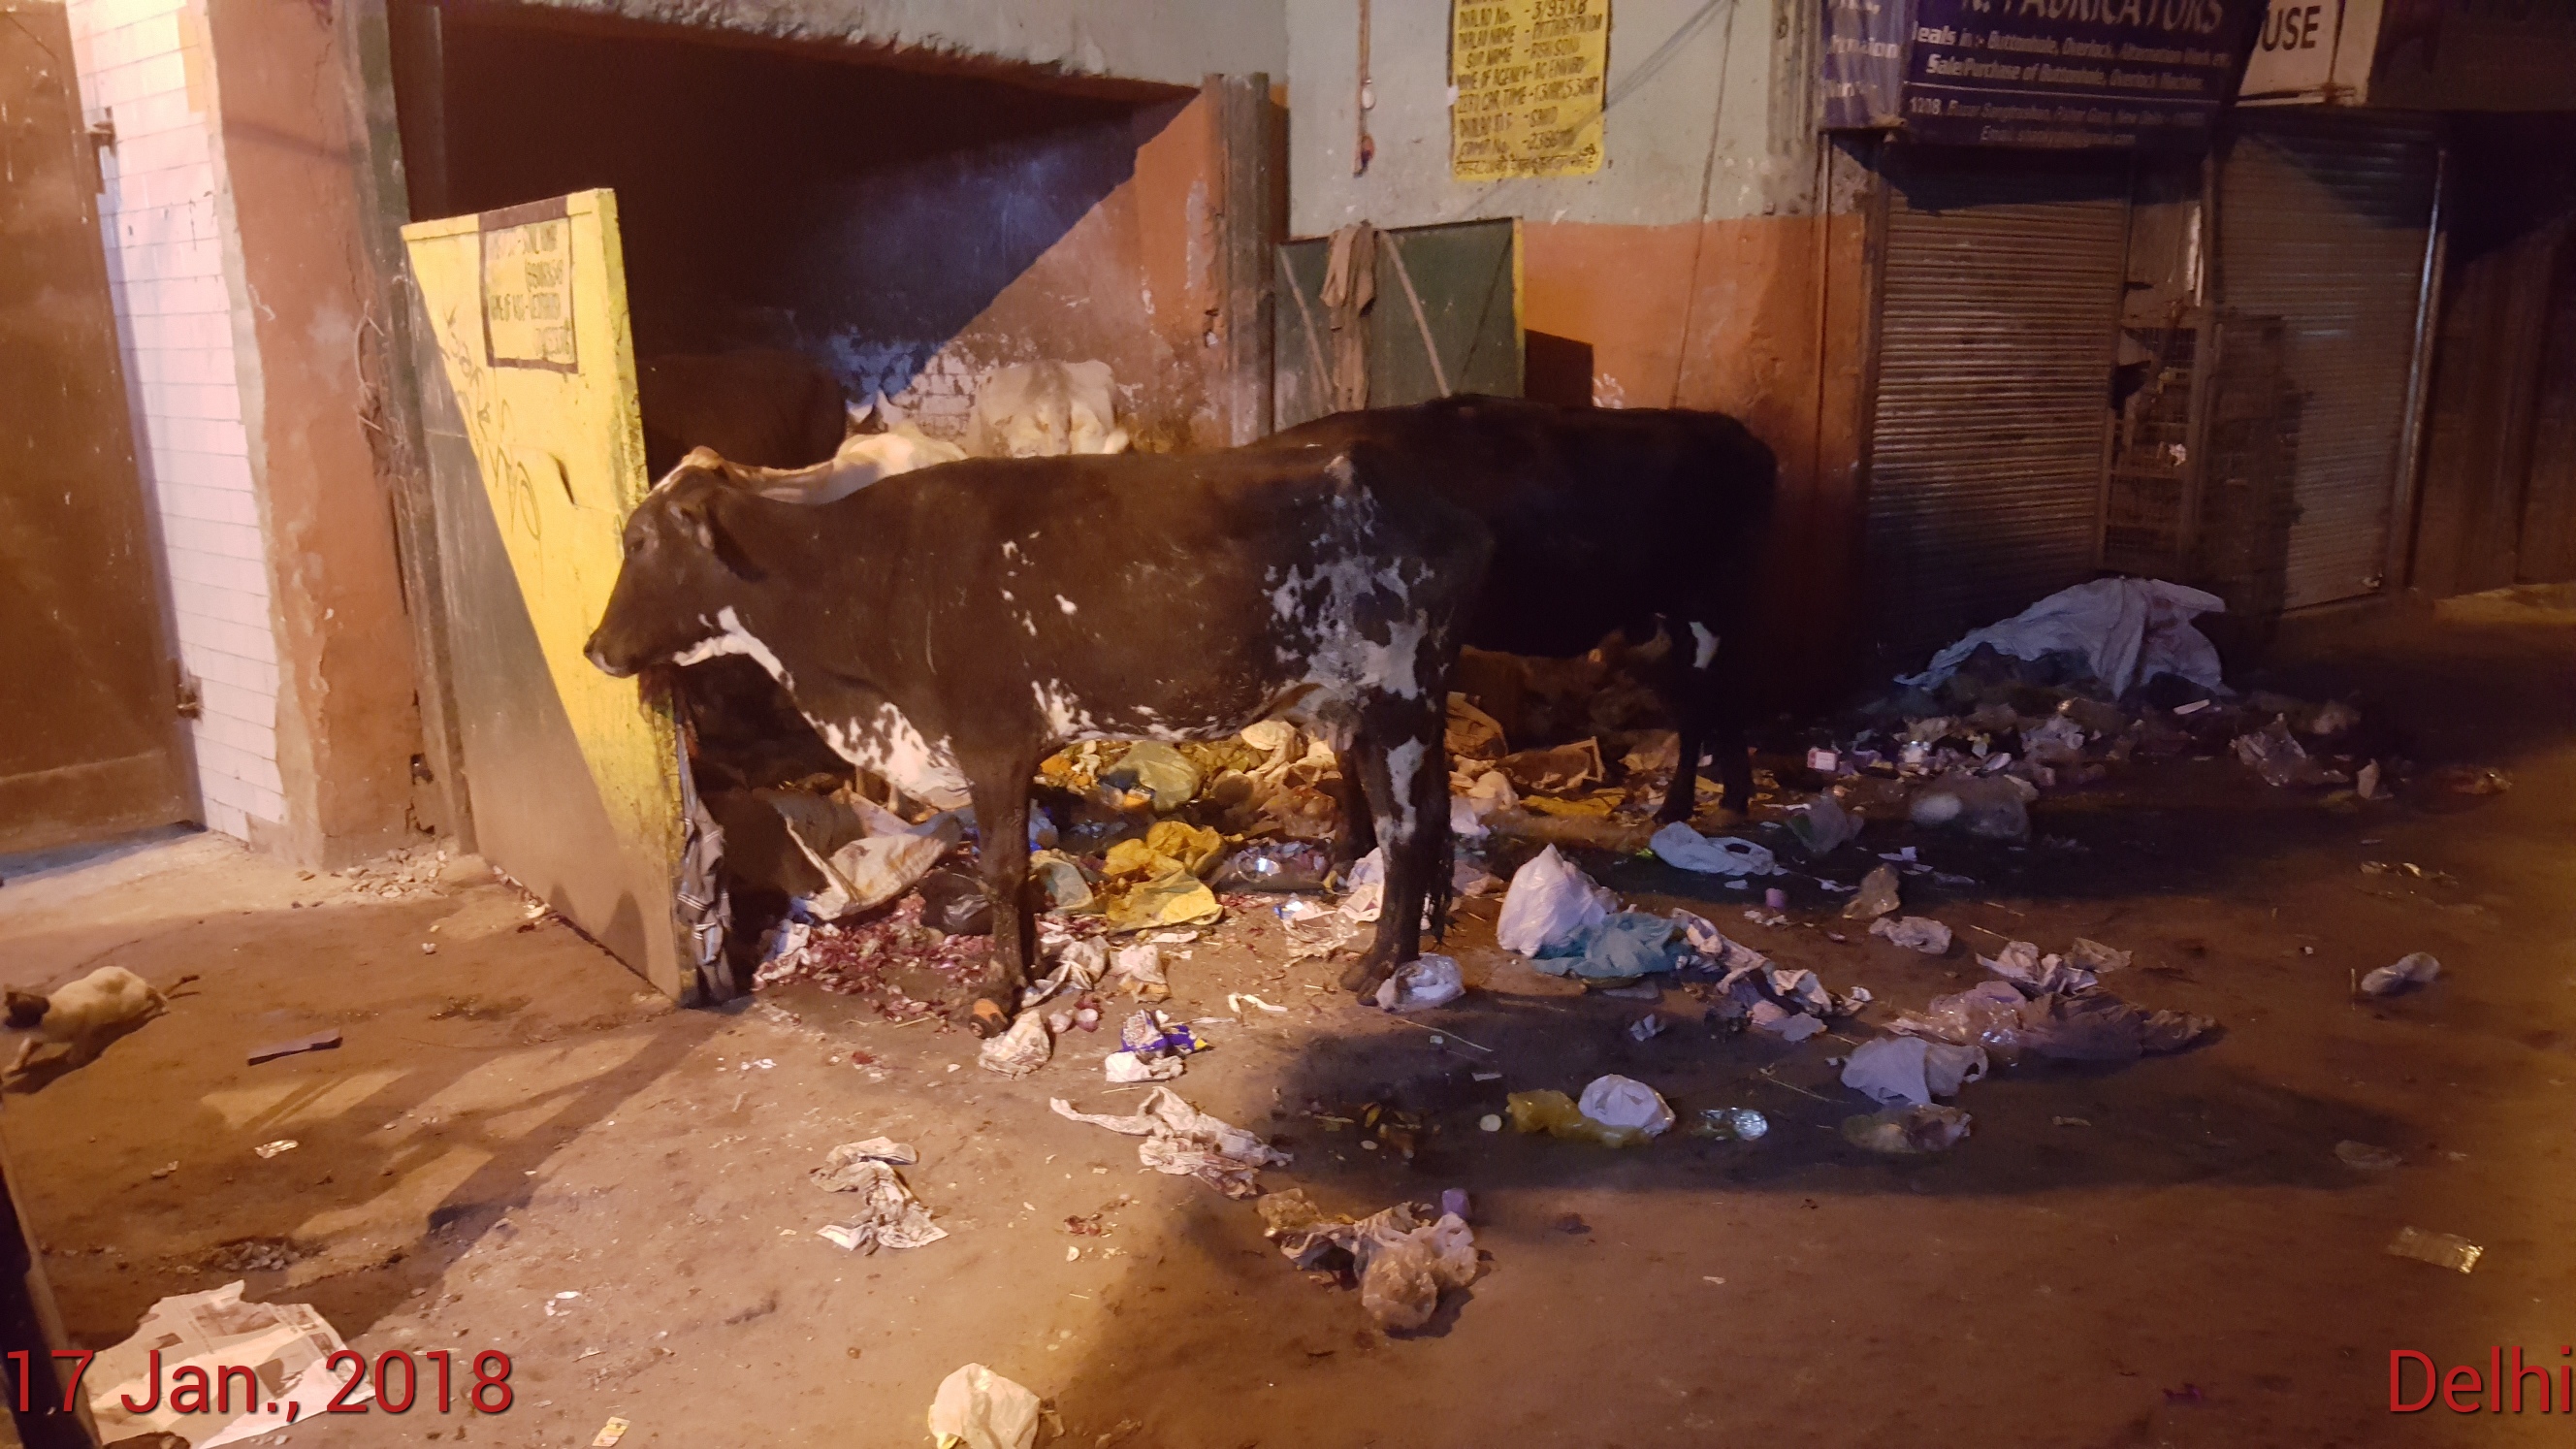 cows cleaning up the rubbish and having an enjoyable dinner in our local alley